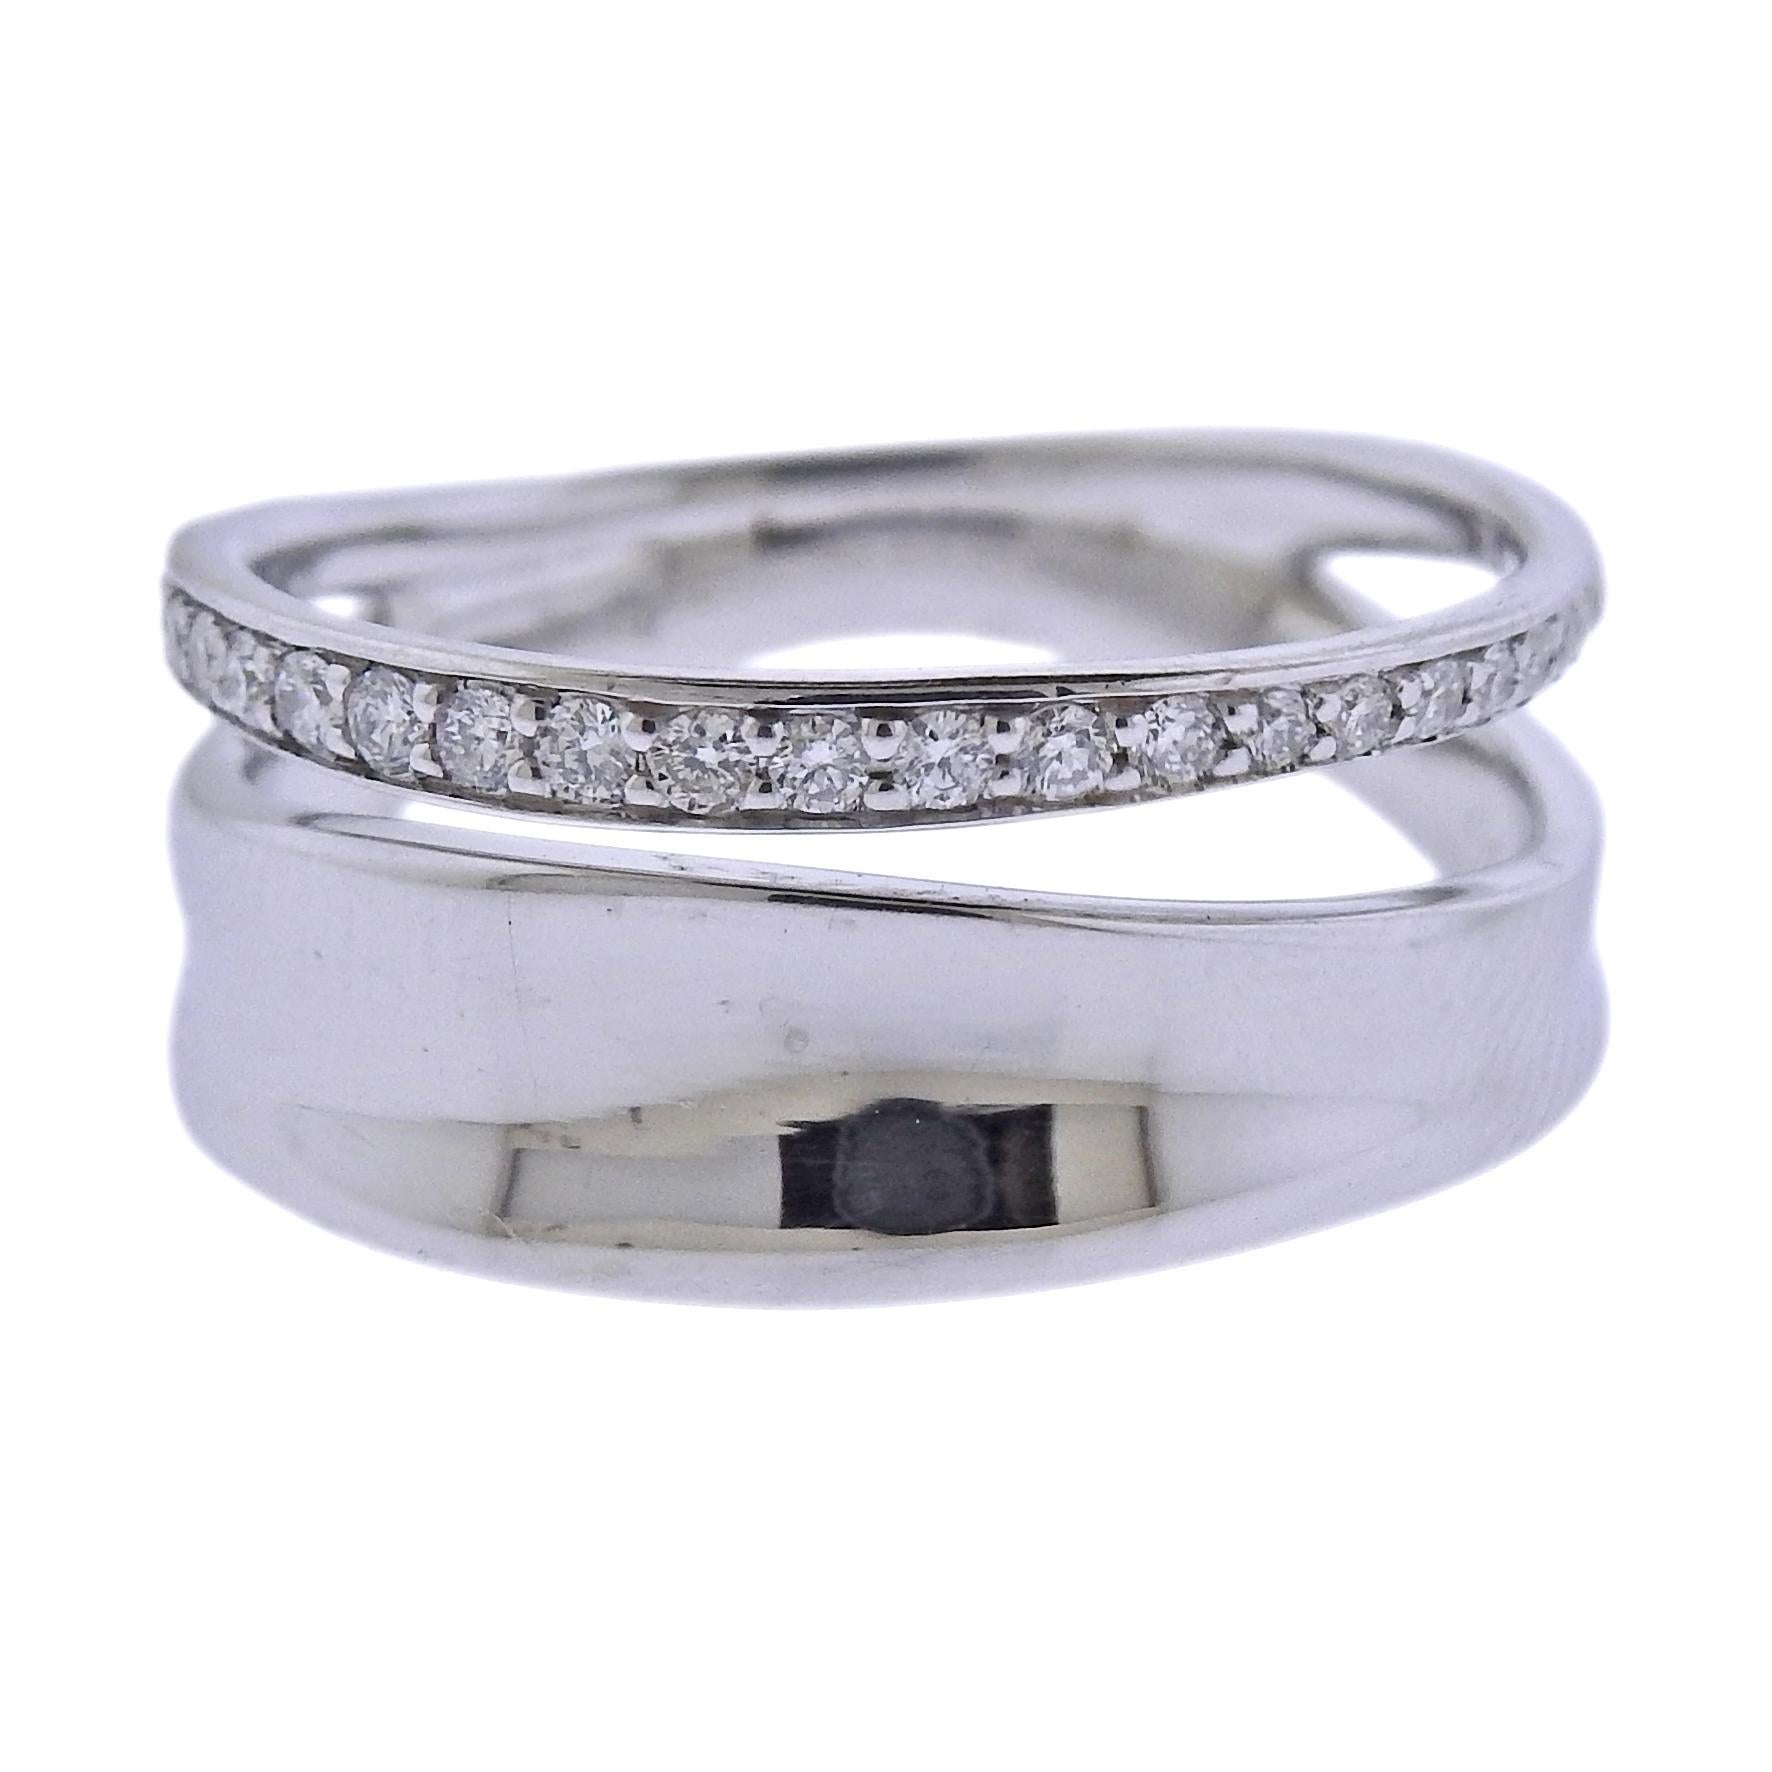 Brand new Georg Jensen sterling silver Marcia ring set with approximately 0.17ctw G/VS diamonds. Top of the ring measures 9mm wide, following sizes are available: 53;57;58. Model# 3560940. Marked: GJ, 925 S, 618 B. Weight is 3.7 grams.